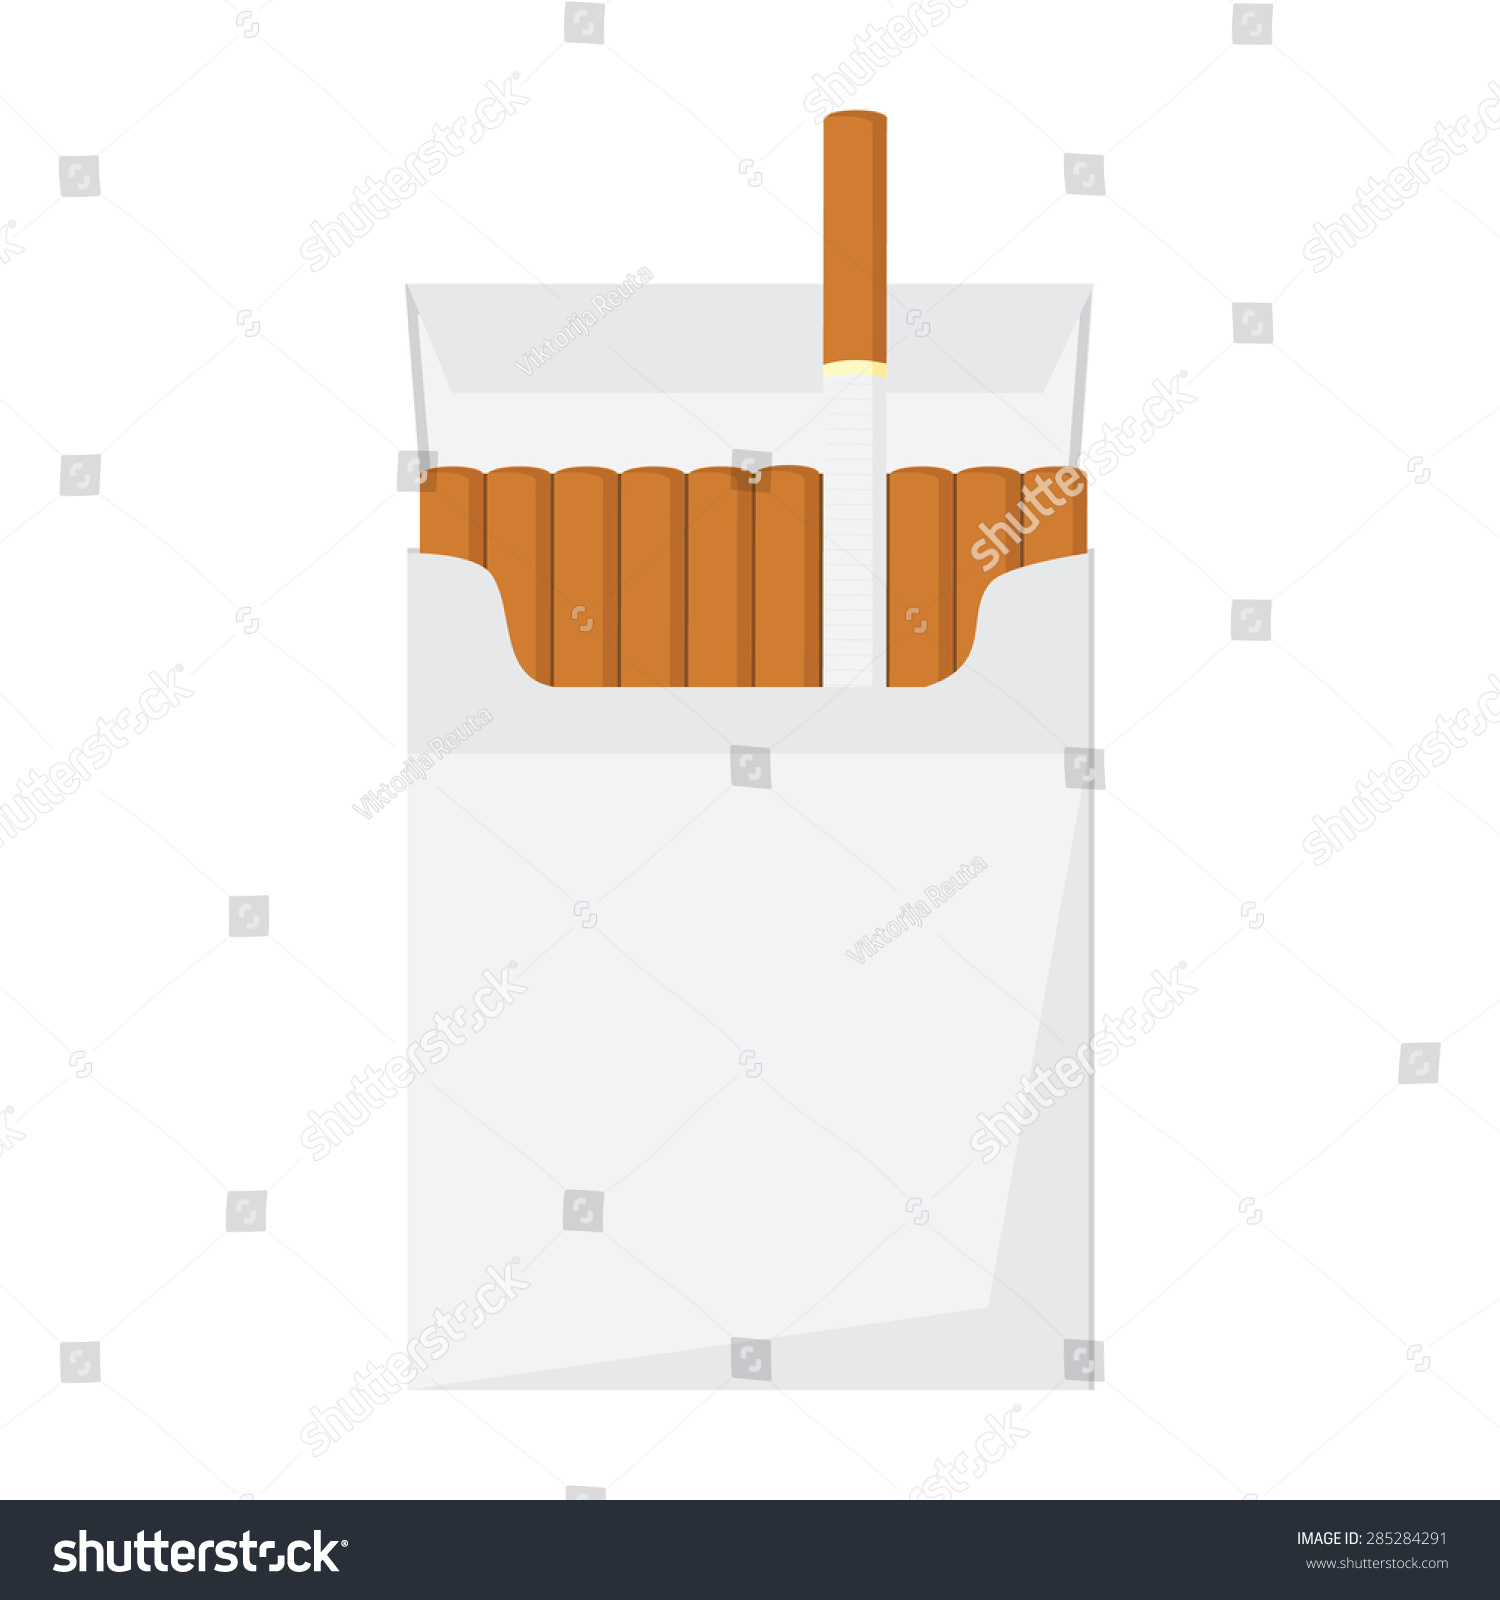 Opened Cigarette Pack Cigarettes Vector Illustration Stock Vector Royalty Free